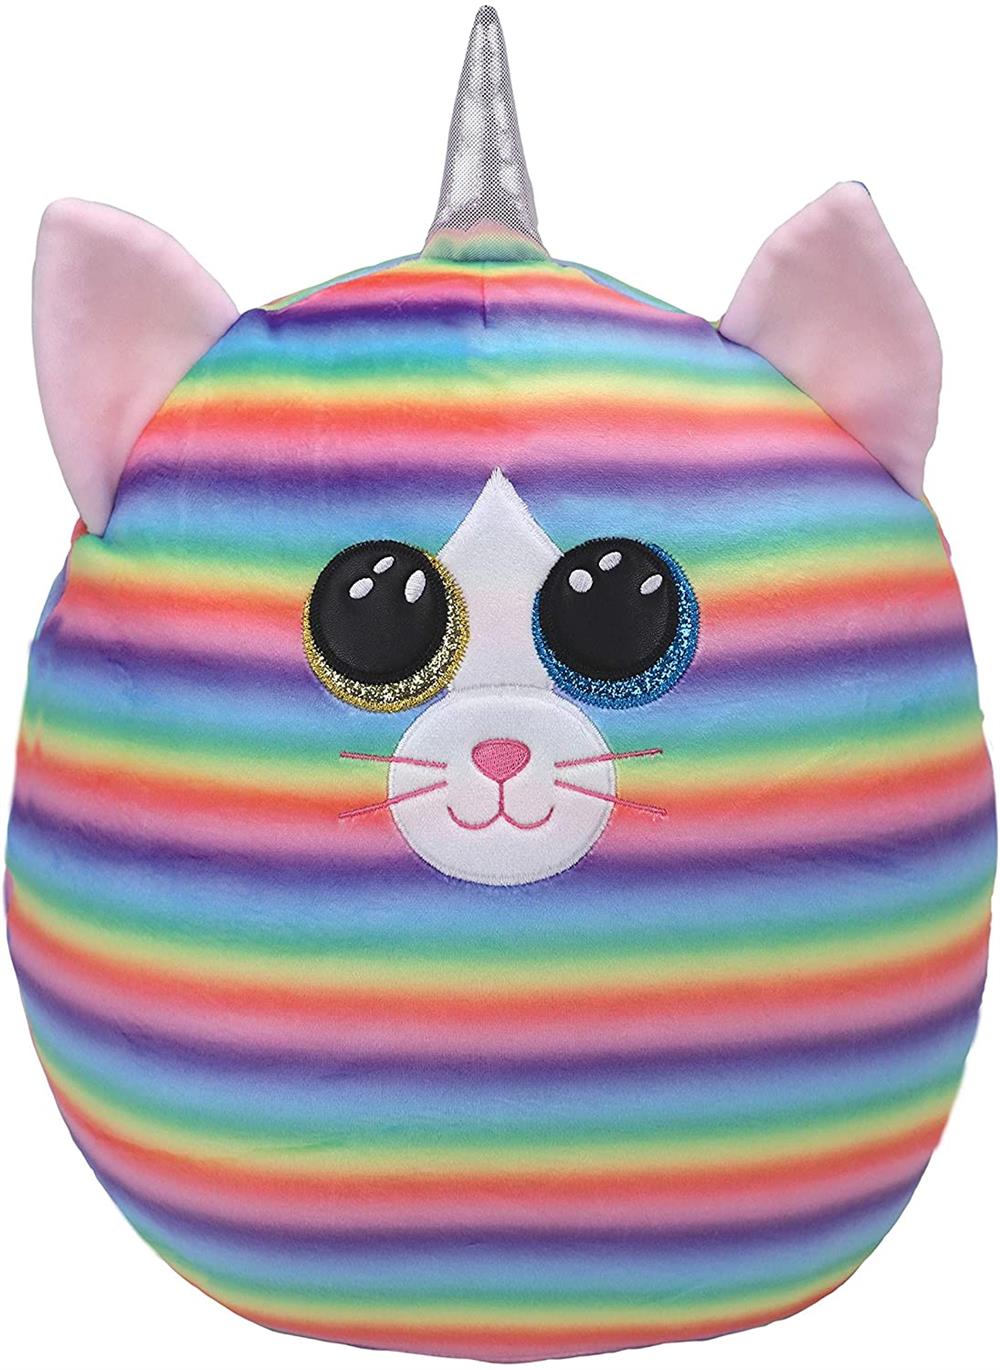 TY Heather Pastel Striped Cat Squish-A-Boo